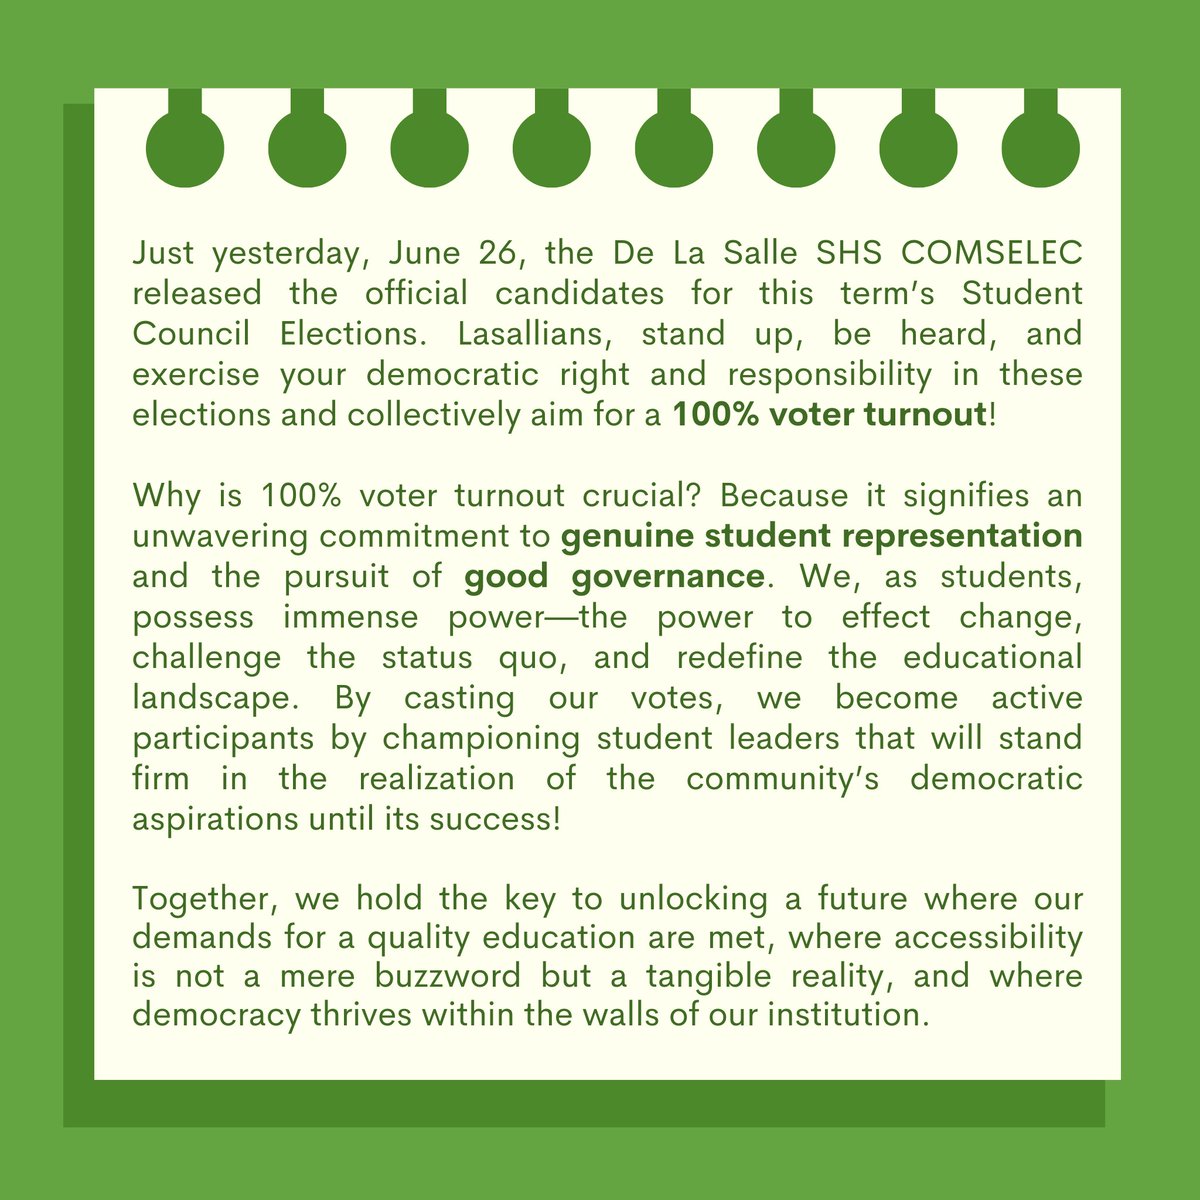 LASALLIANS, TAKE AIM for a 100% voter turnout and fight for quality, accessible, and democratic education! 🎯🗳️

#ArchersAims
#NoToMROTC
#NoToTOFI